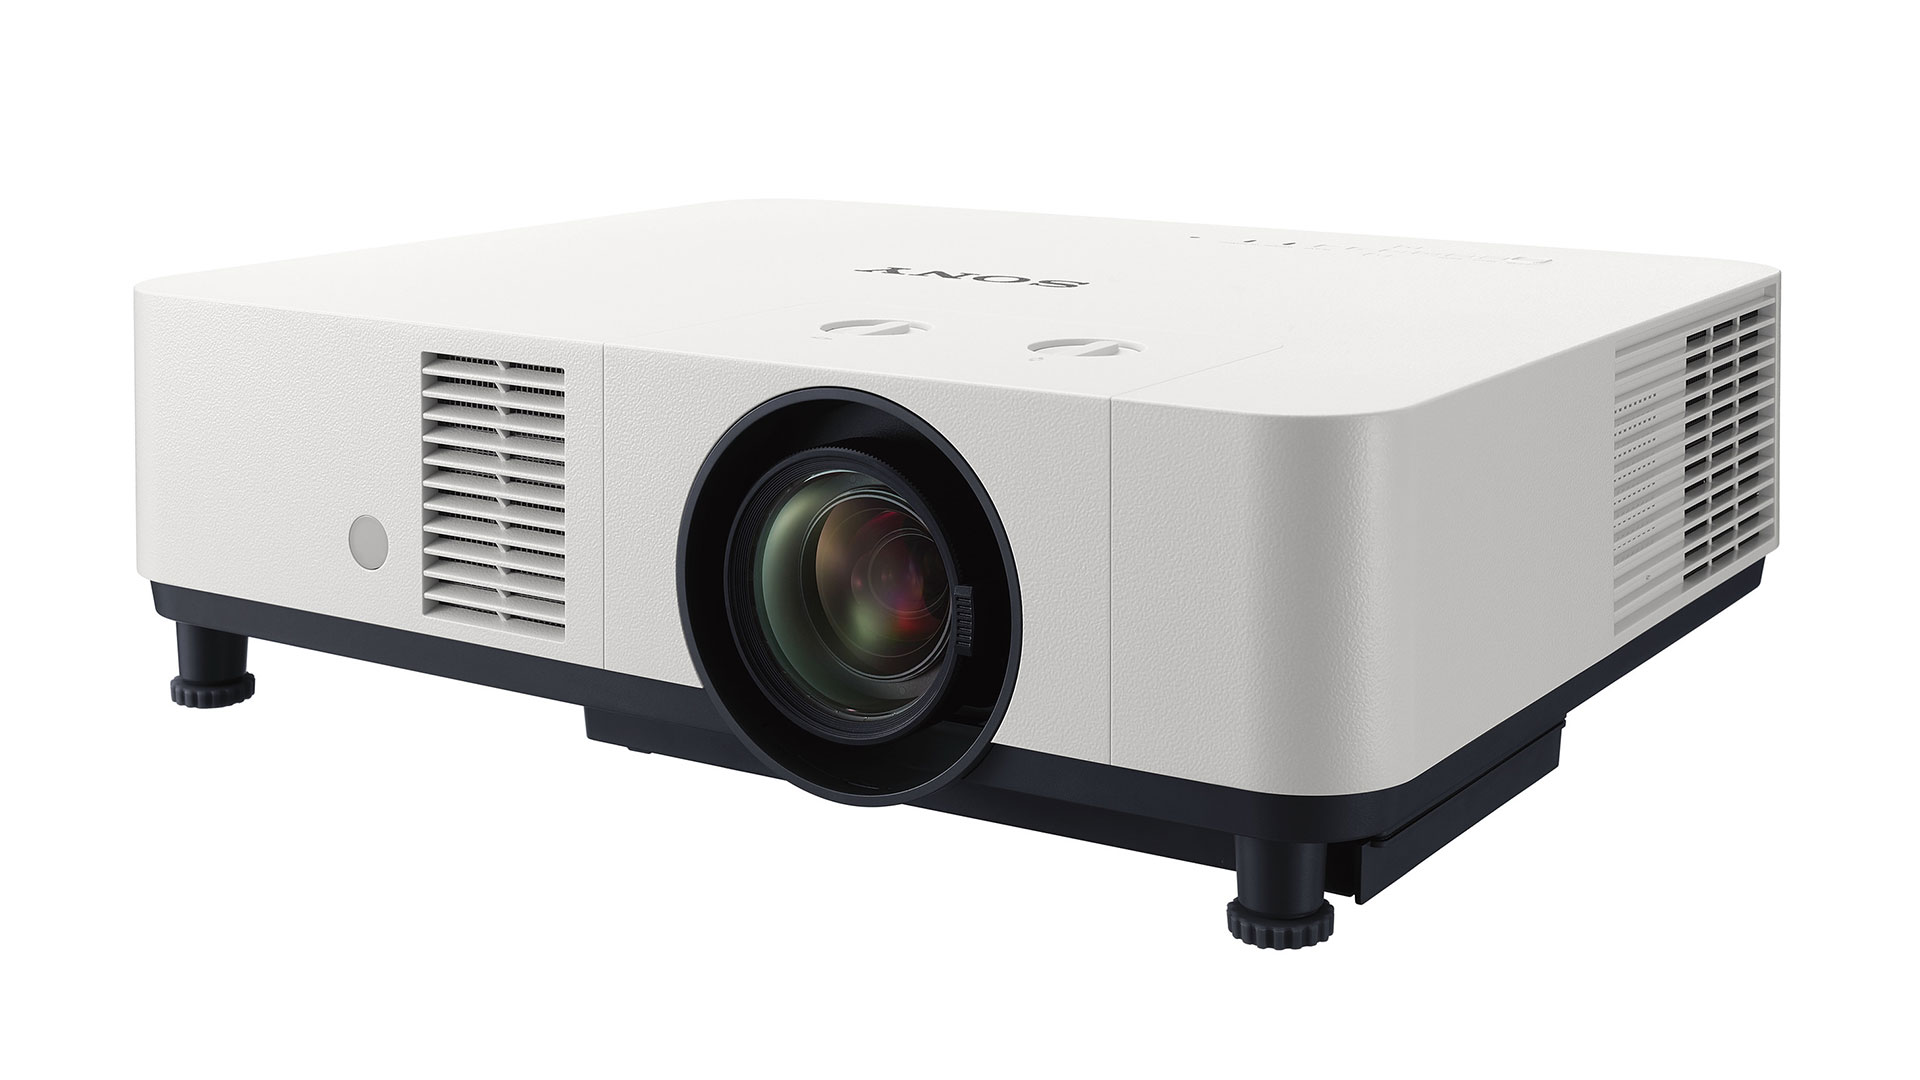 Sony Vpl-Phz61 Projector Chassis - Projector Reviews - Image